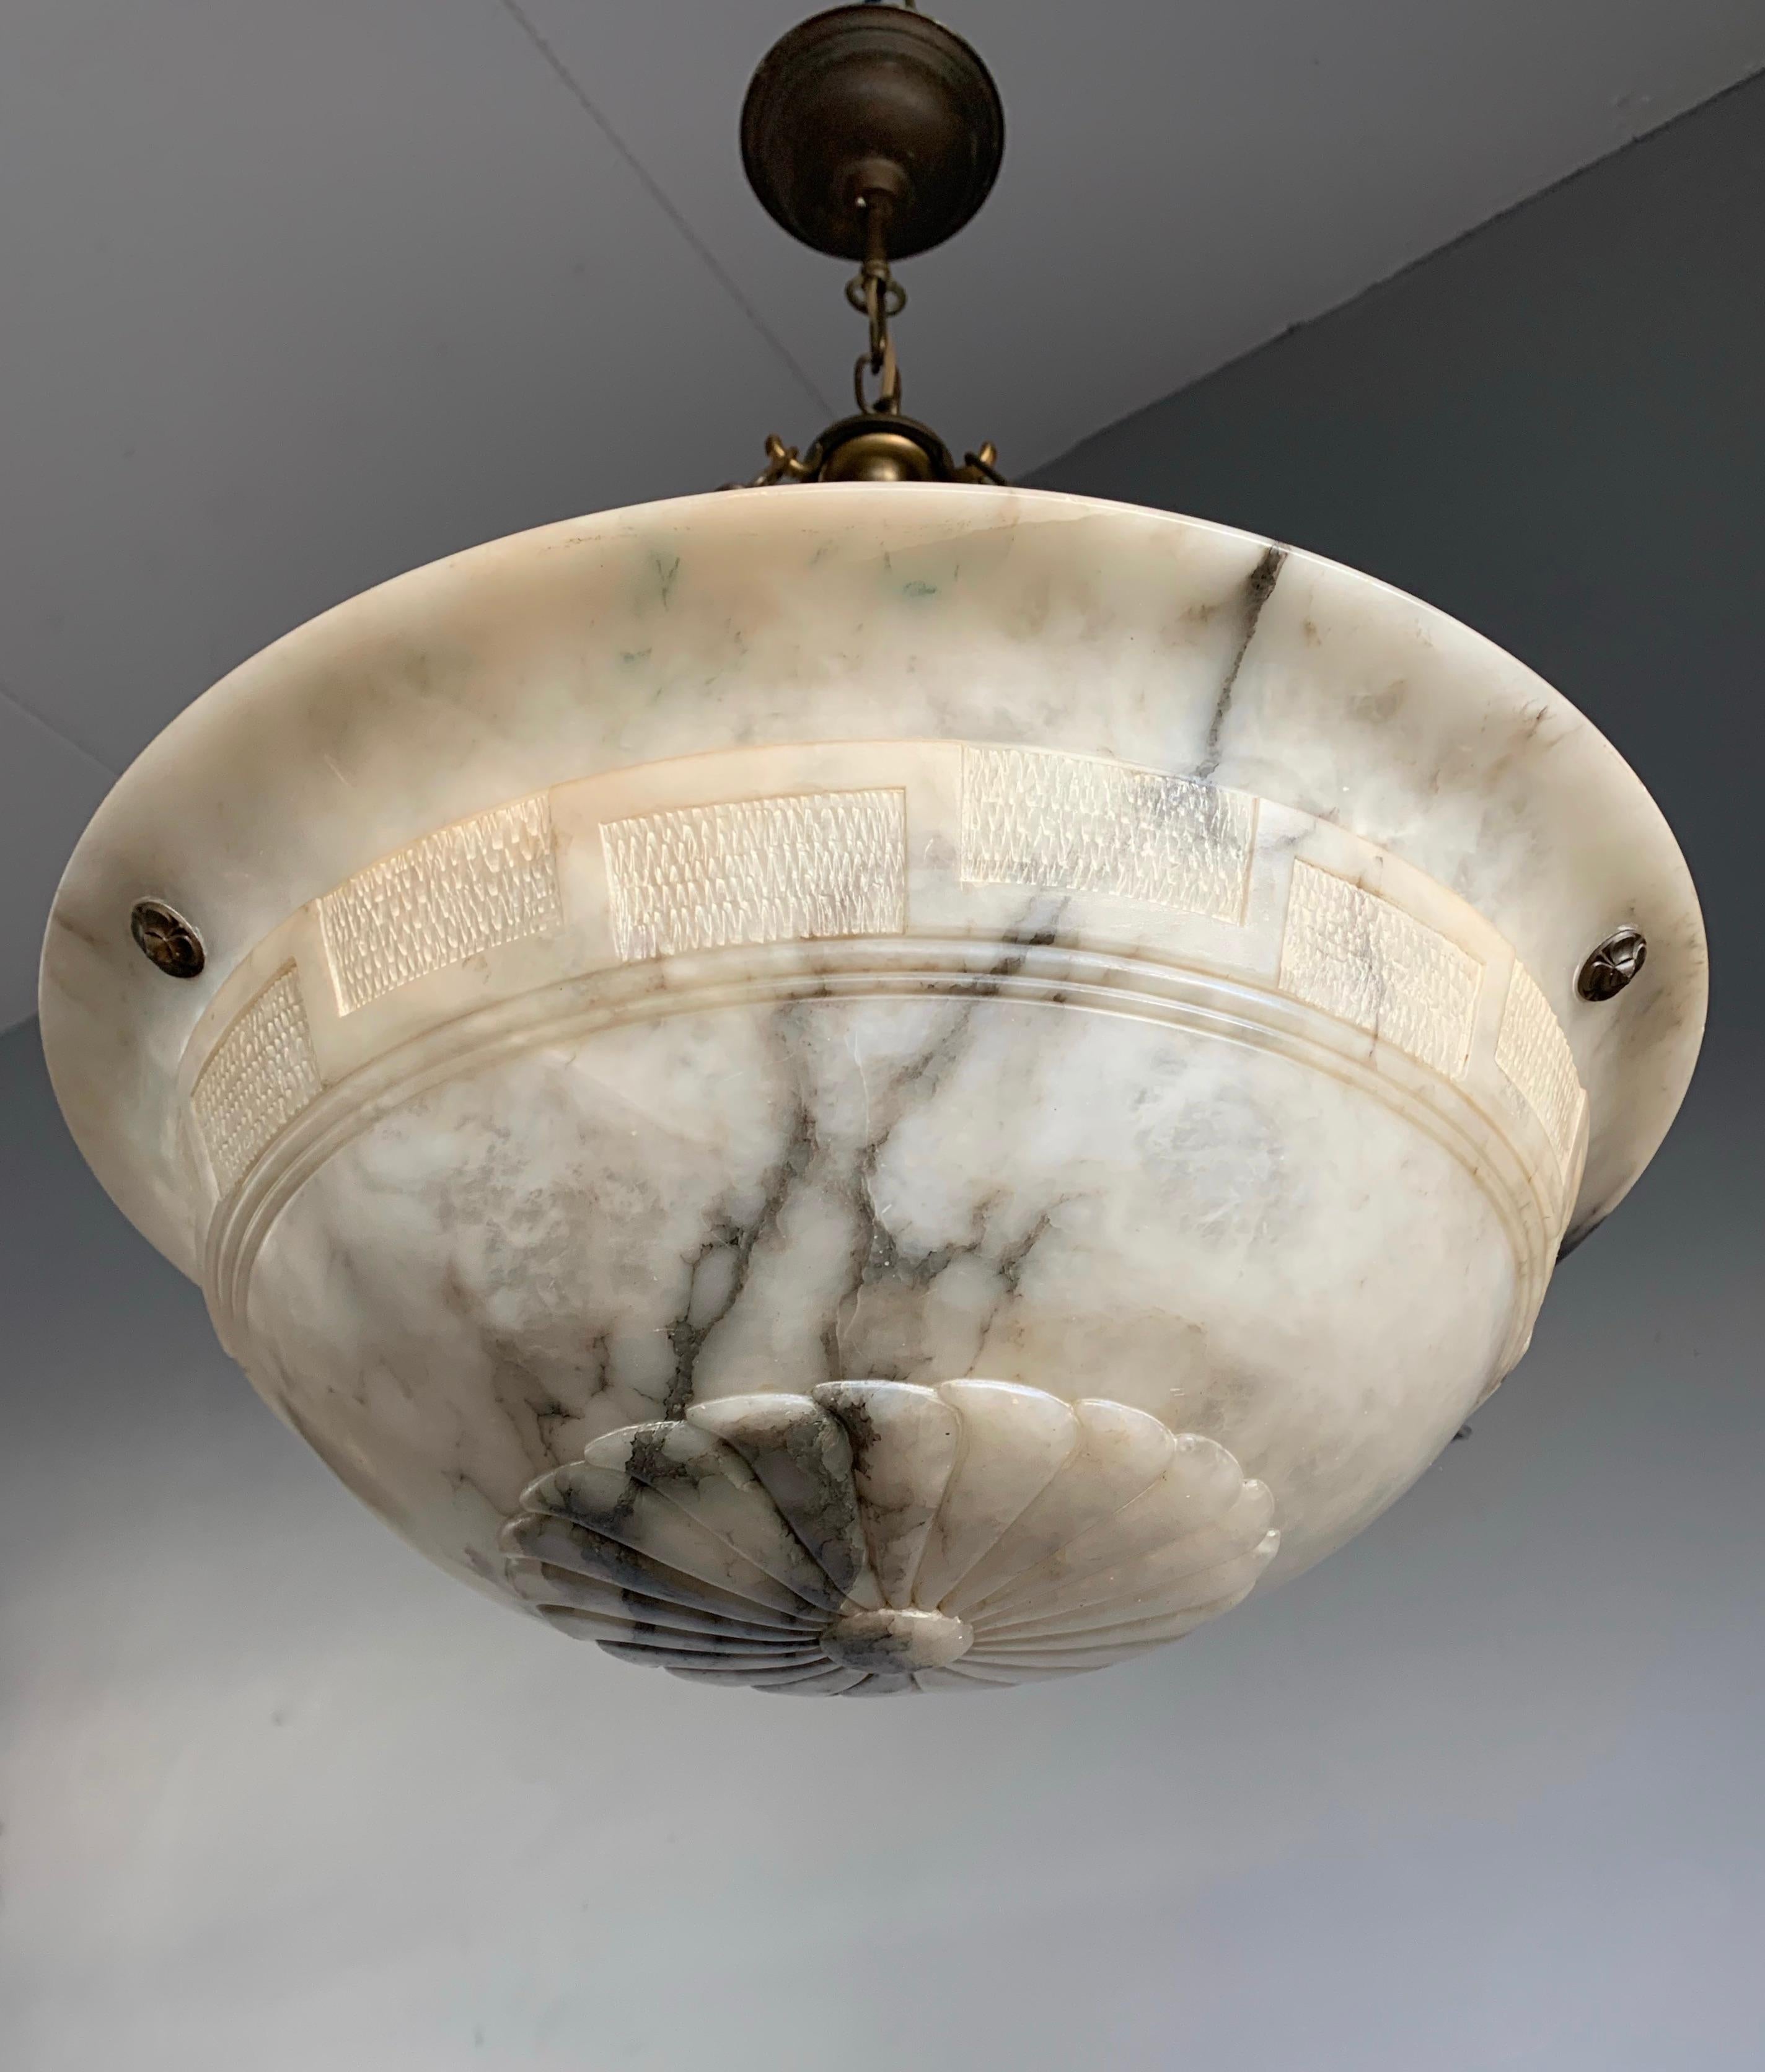 Superb condition chandelier with a stunning and great size alabaster shade.

Thanks to its large & deep size and remarkable design this alabaster chandelier will light up both your days and evenings. It is in excellent condition from top to bottom